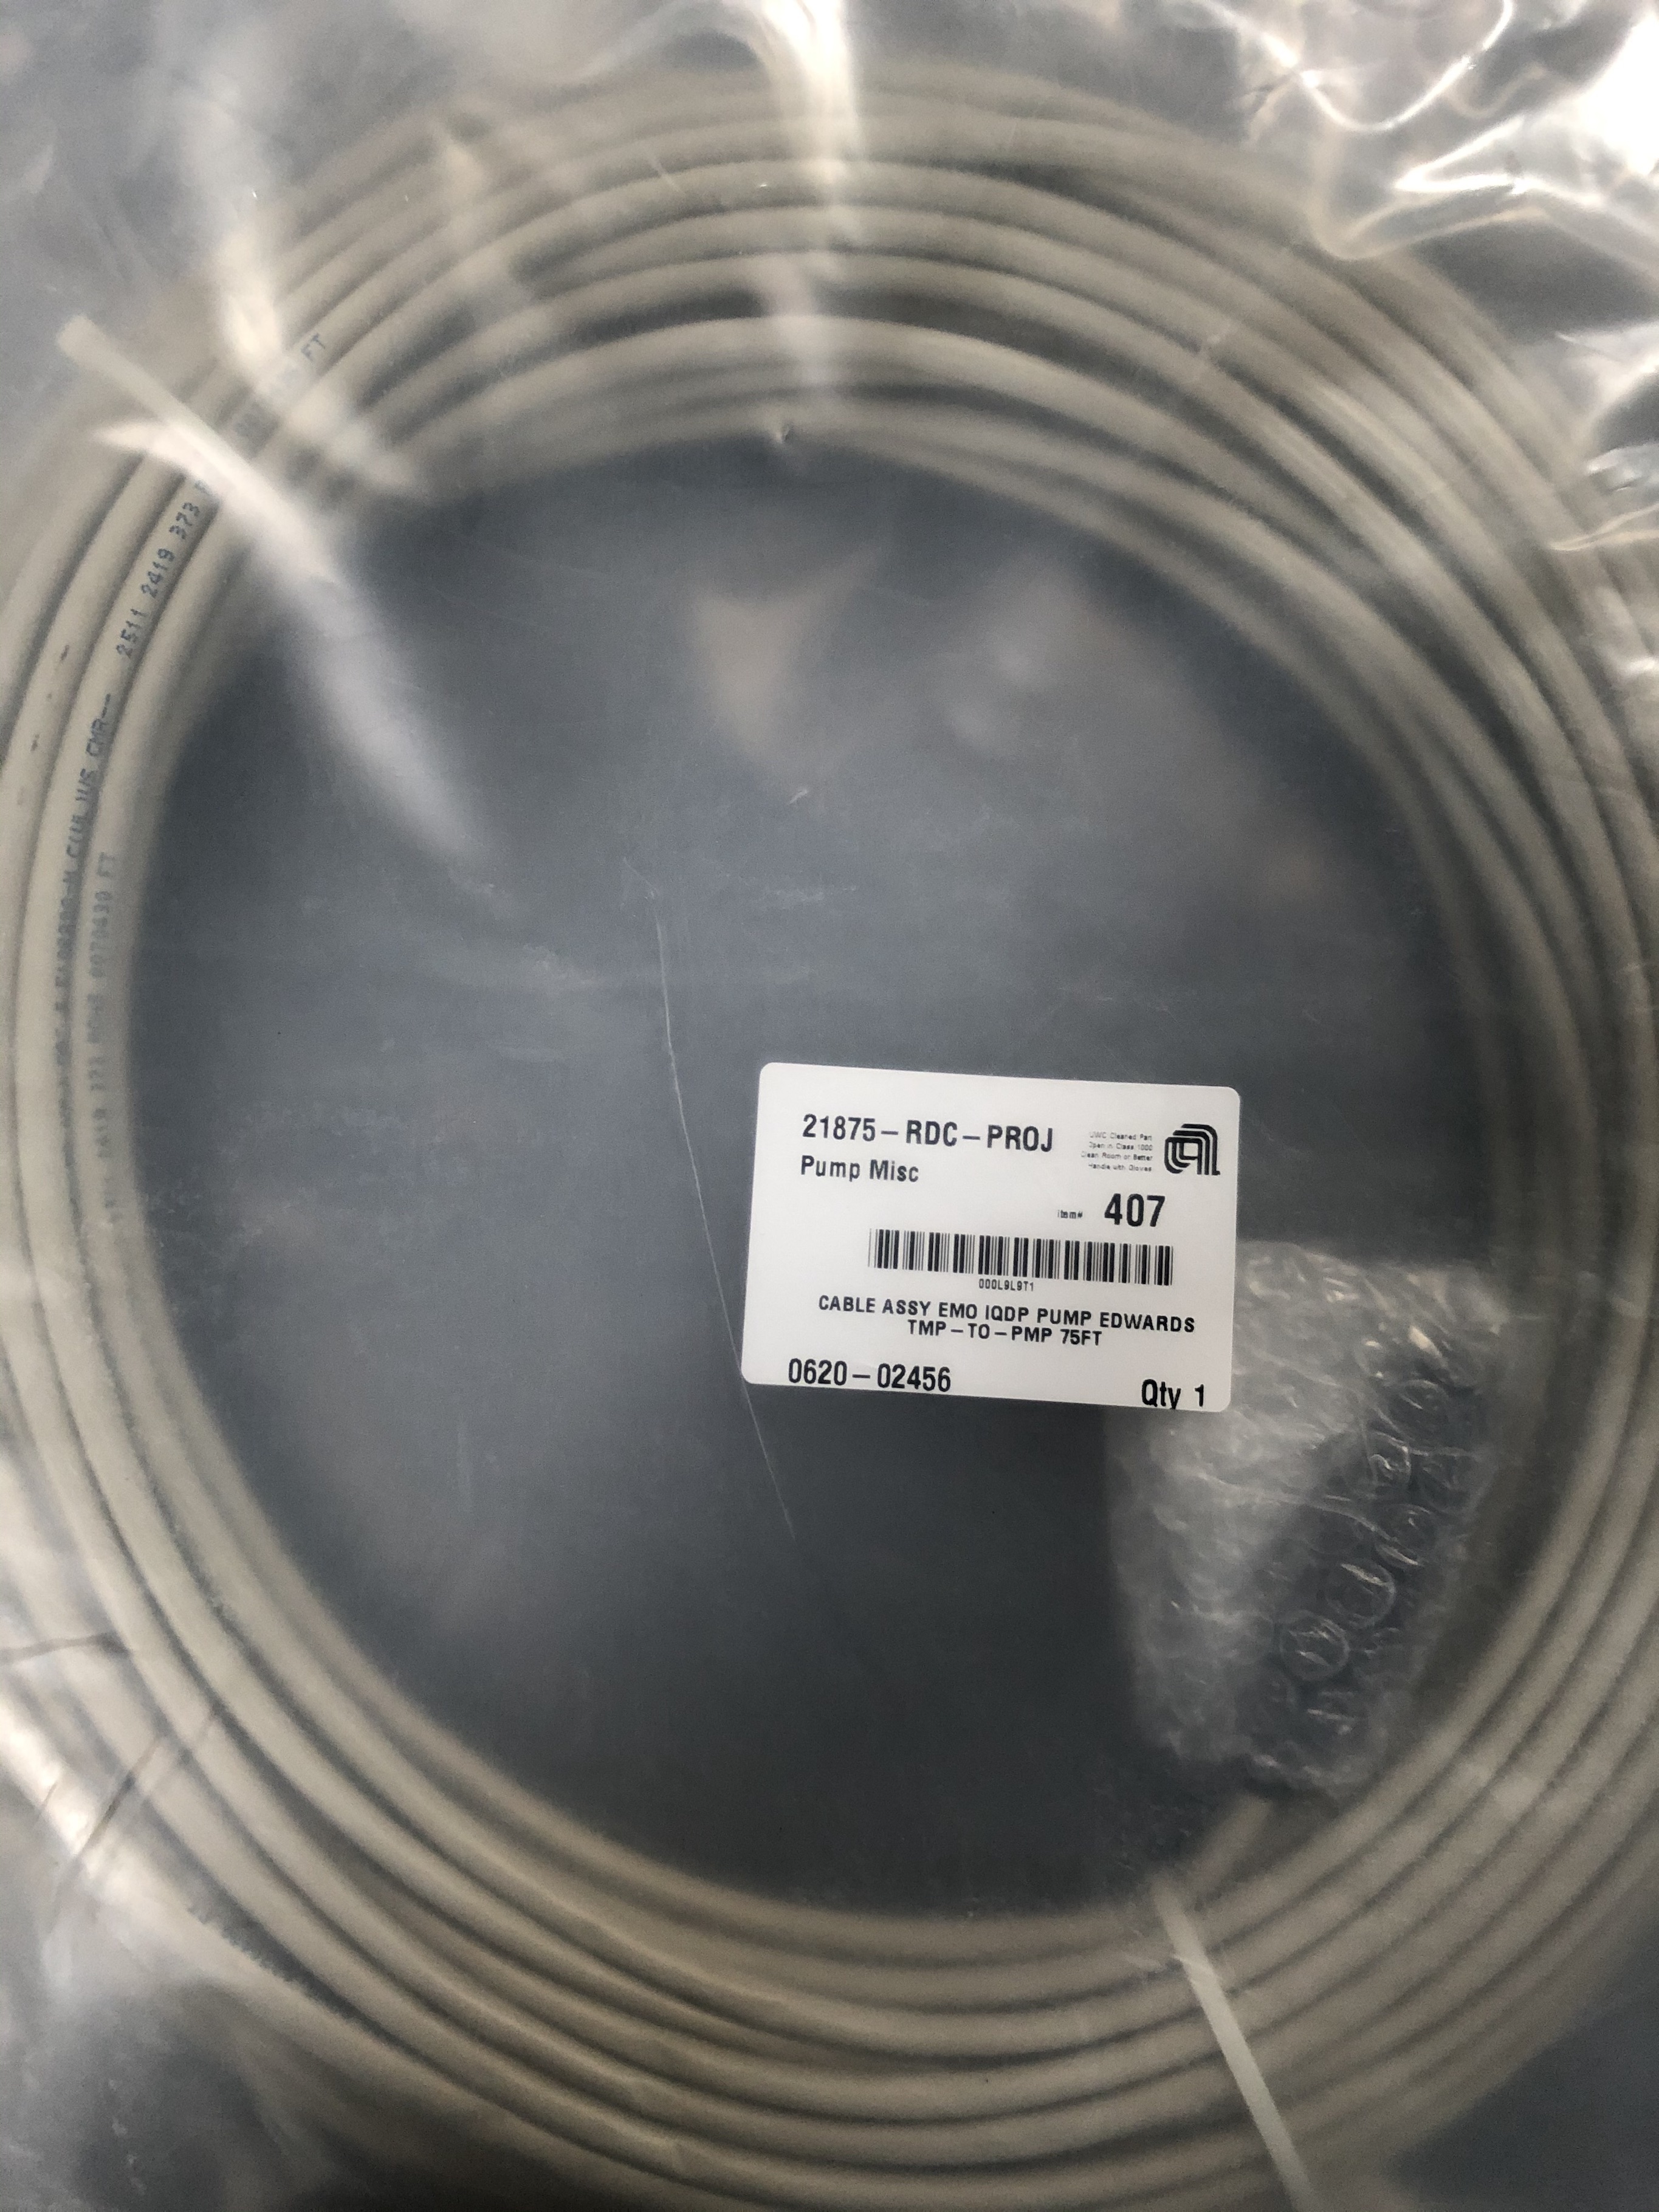 CABLE ASSY EMO EQDP PUMP EDWAREDS TMP-TO-PMP 75FT